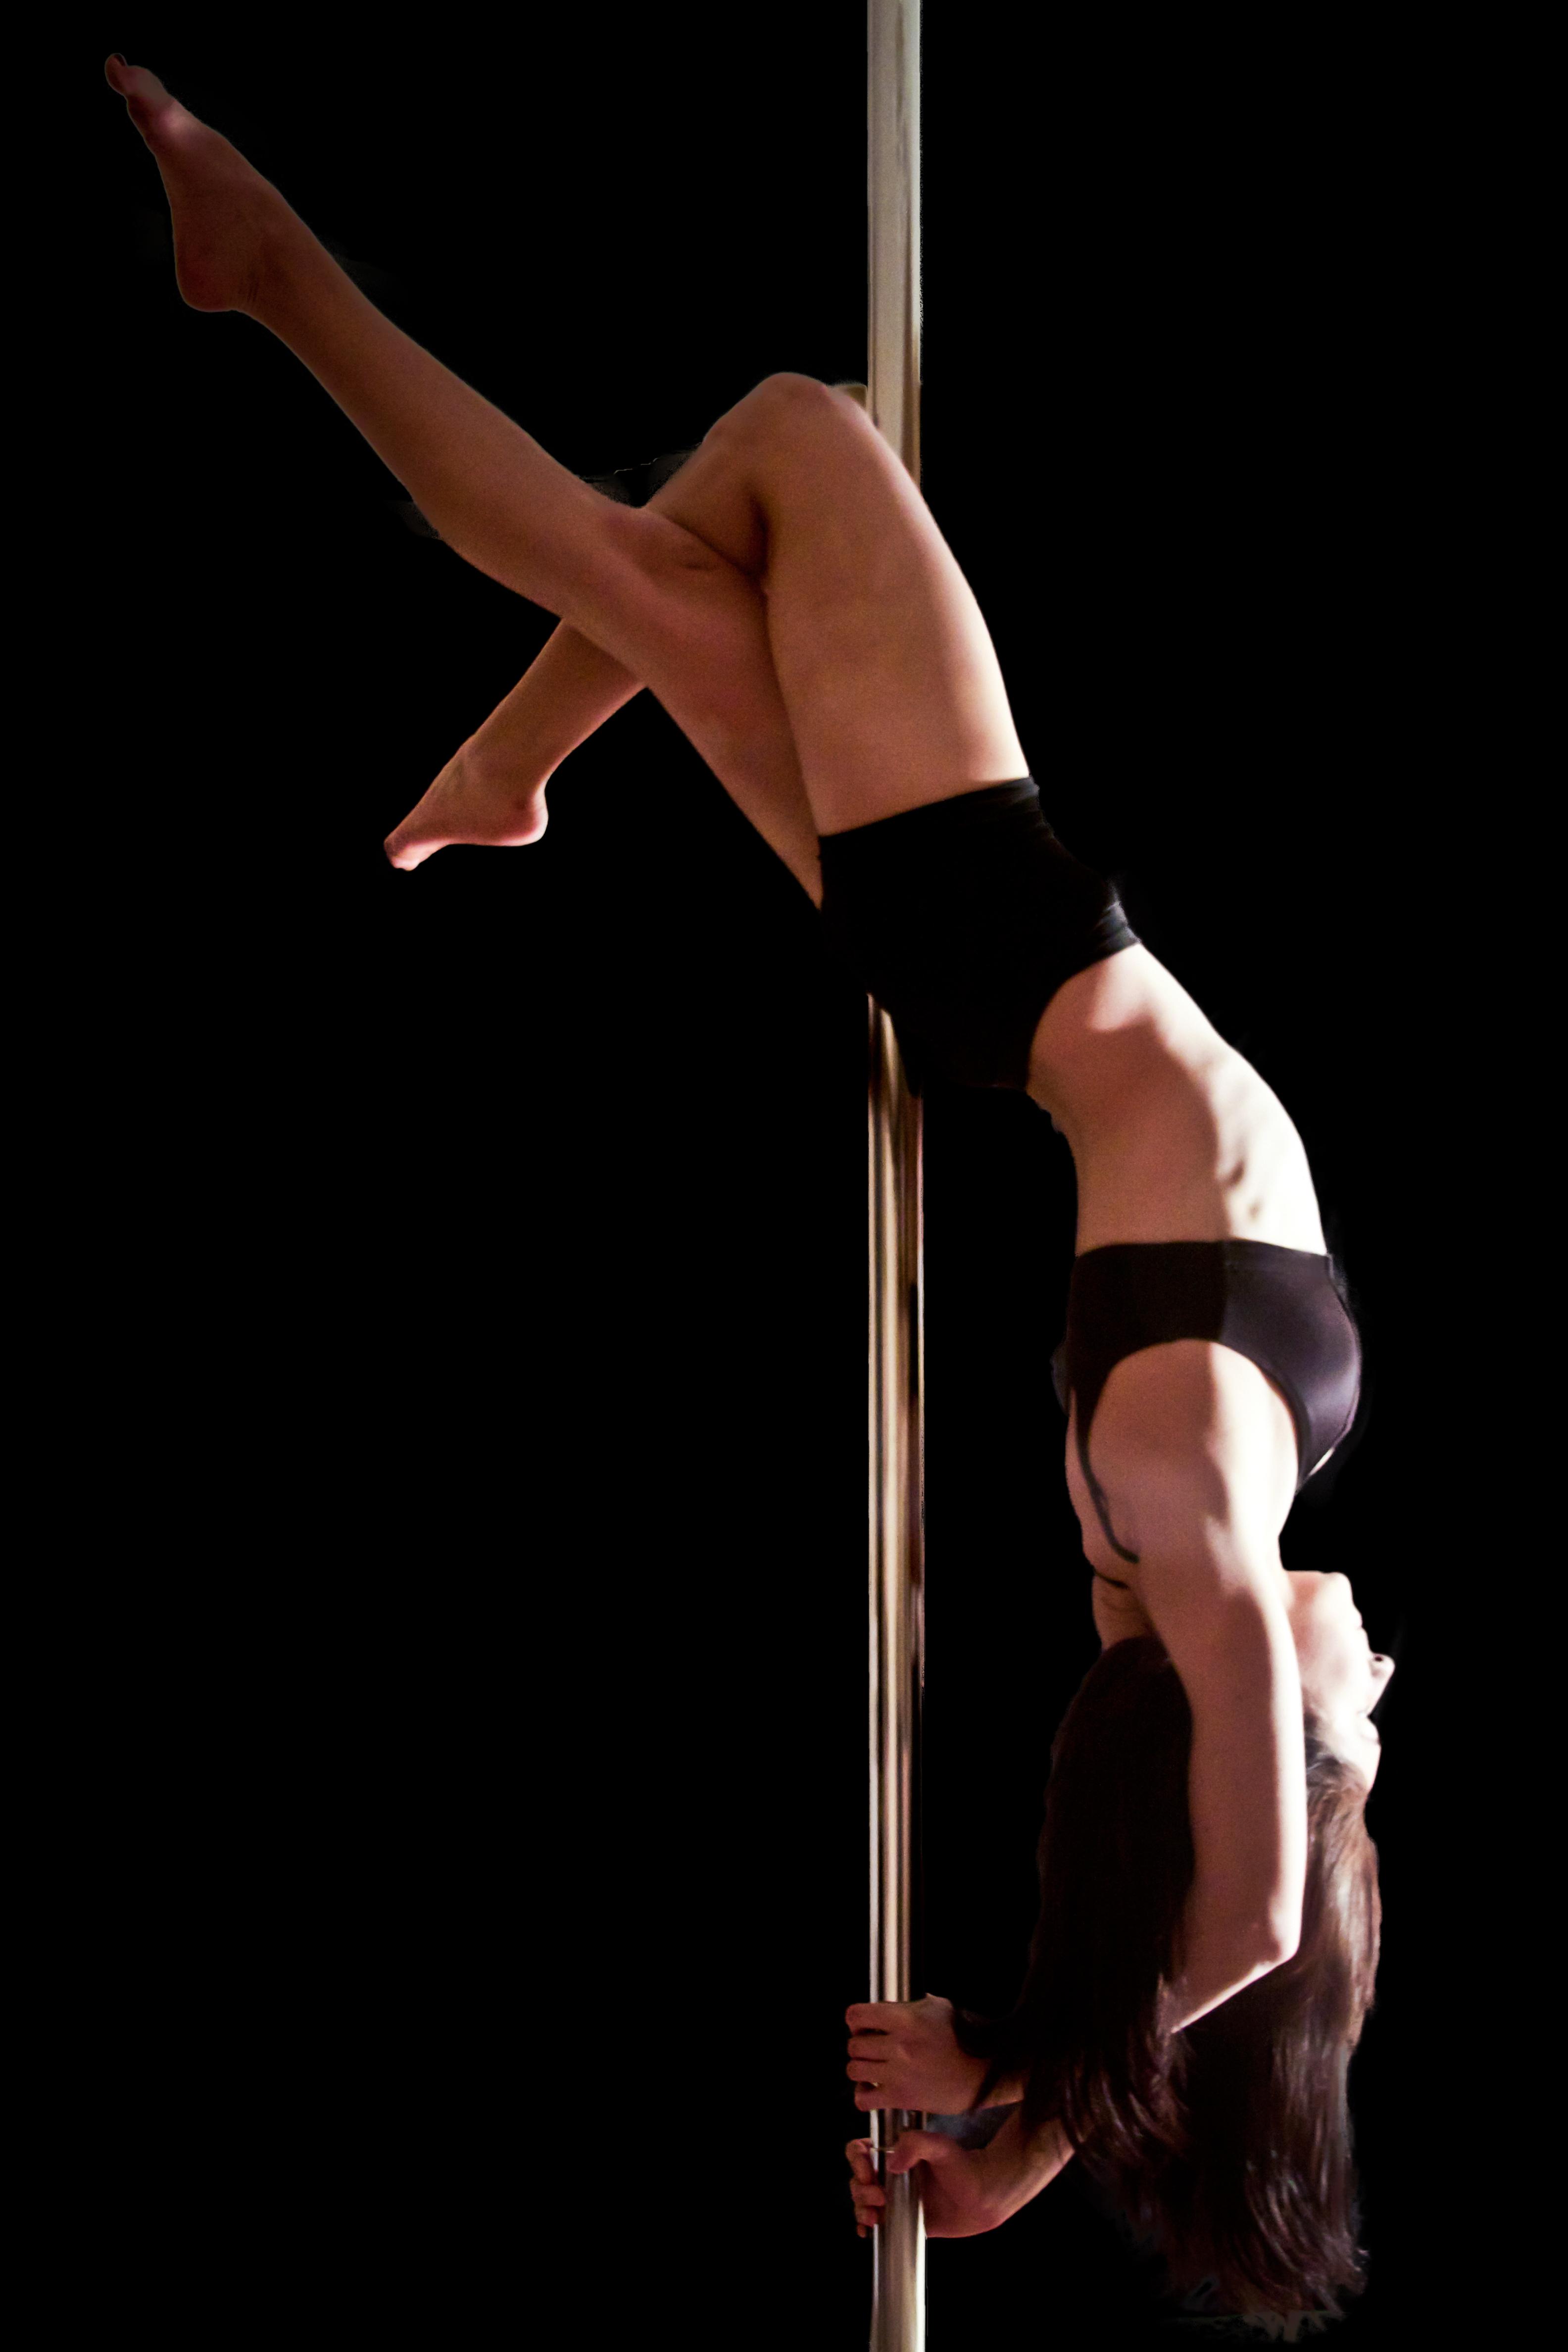 Strippers pole dancing video.